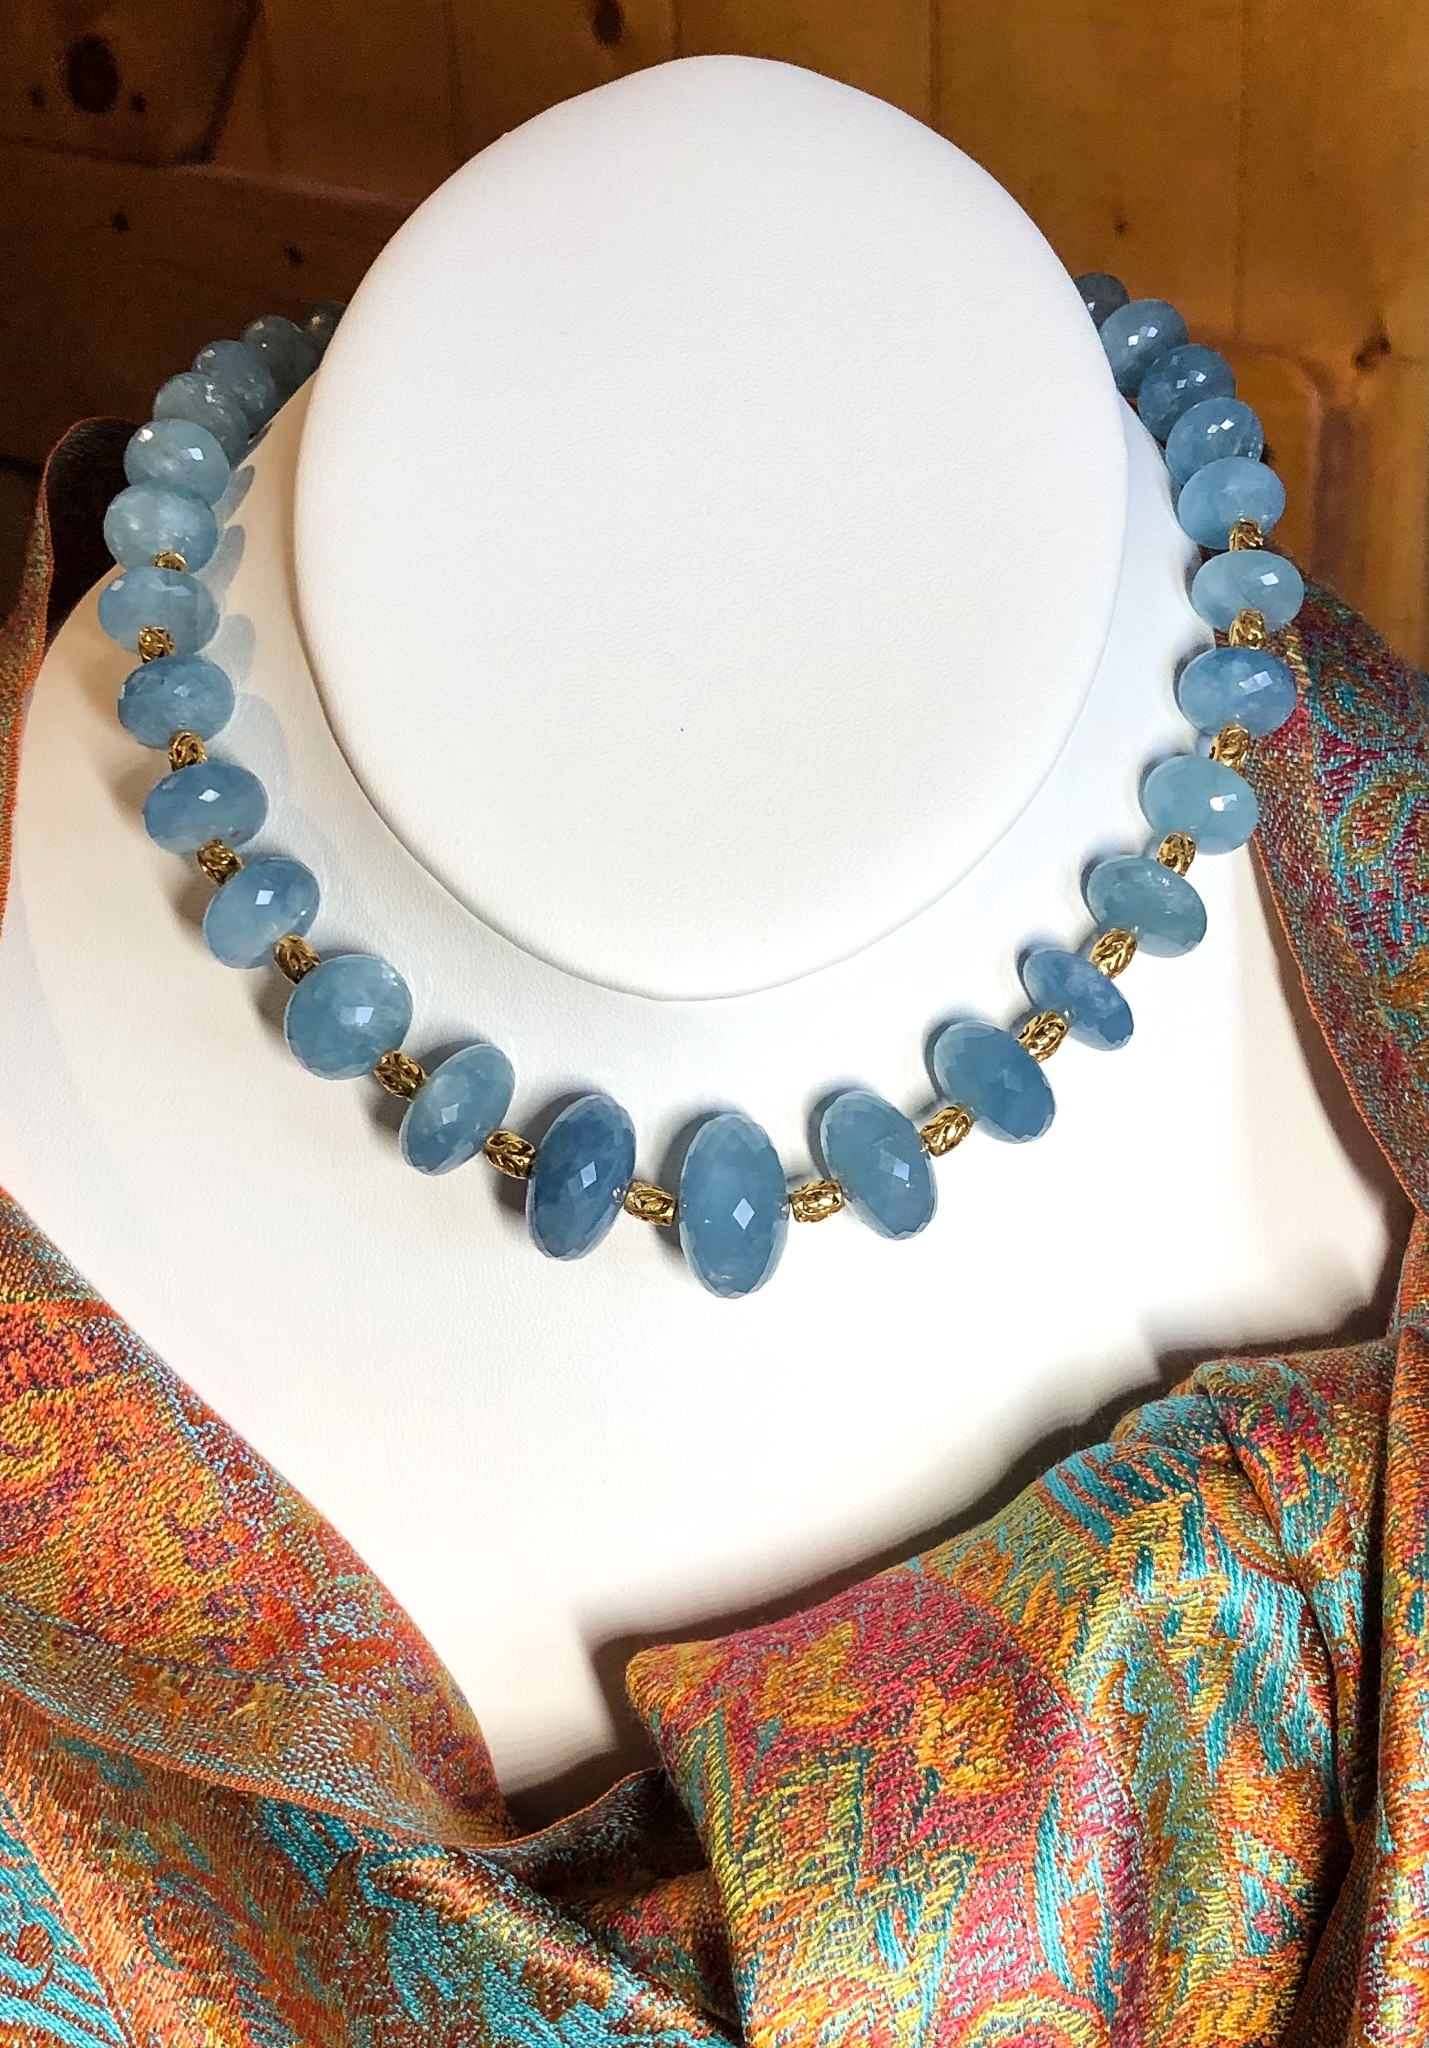 Opaque faceted aquamarine rondelles spaced with 18K gold barrel-shaped beads, shown with an orange and blue silk passim scarf